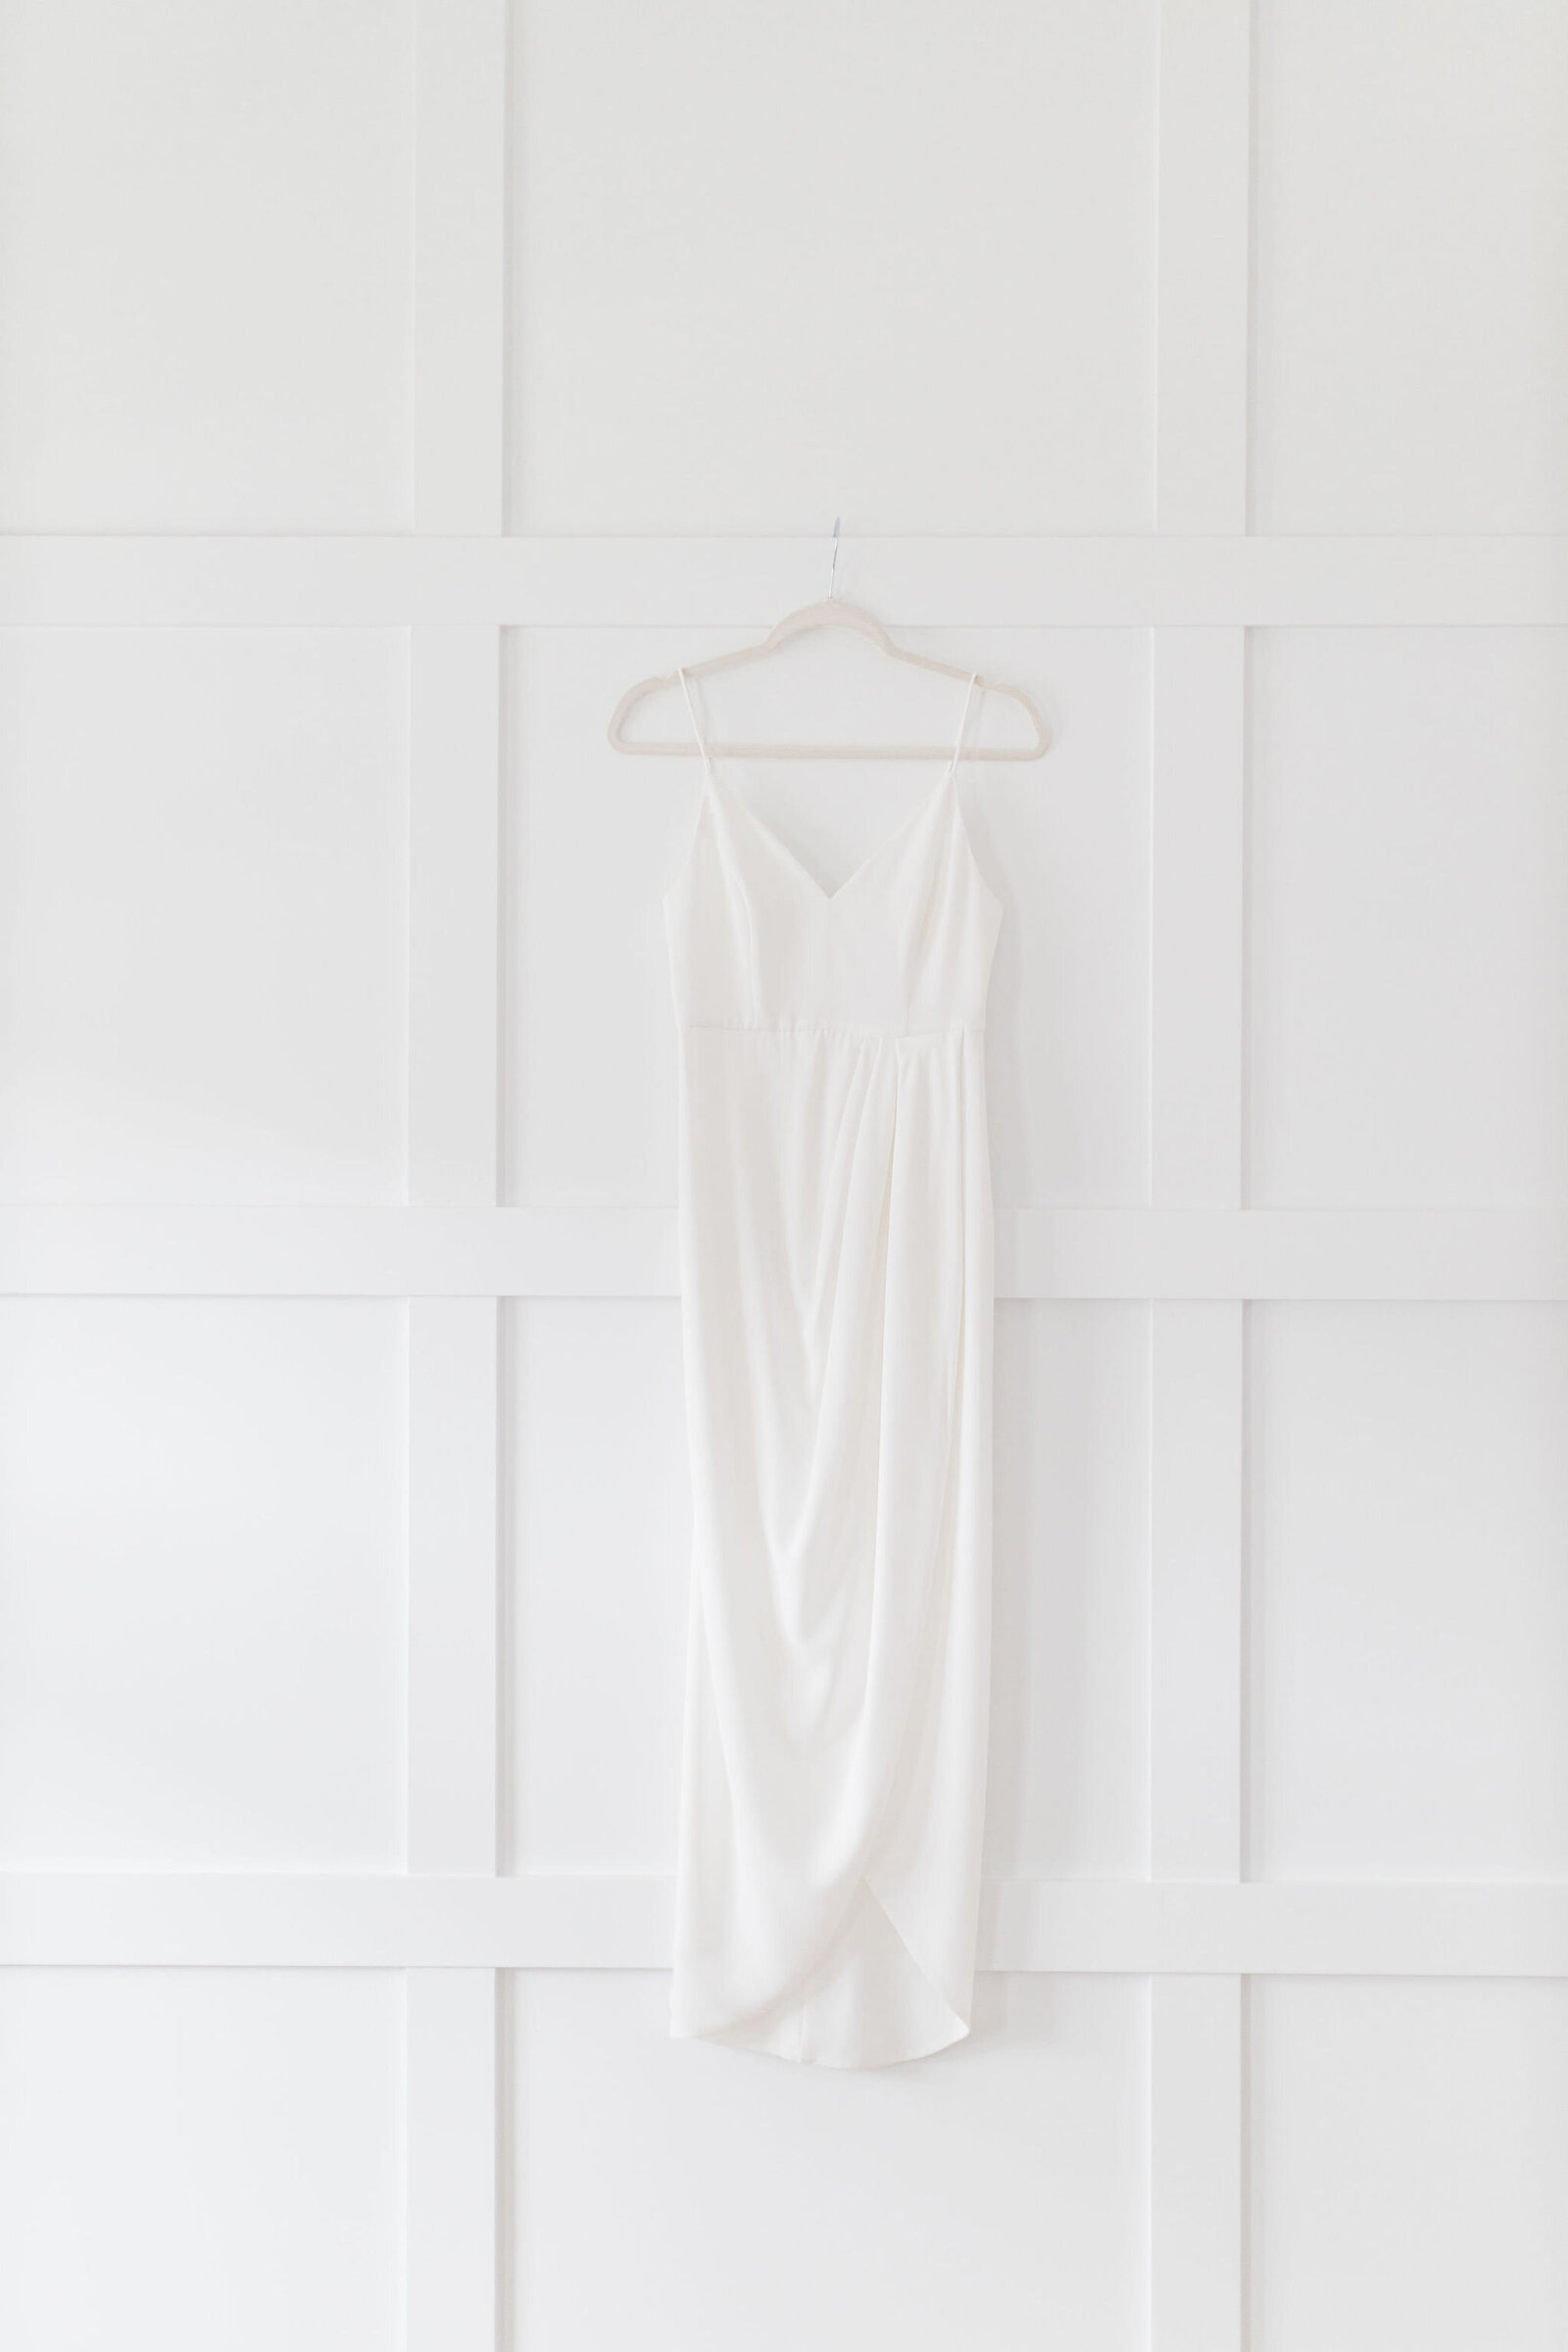 Wedding Dress Details | Raleigh NC | The Axtells Photo and Film